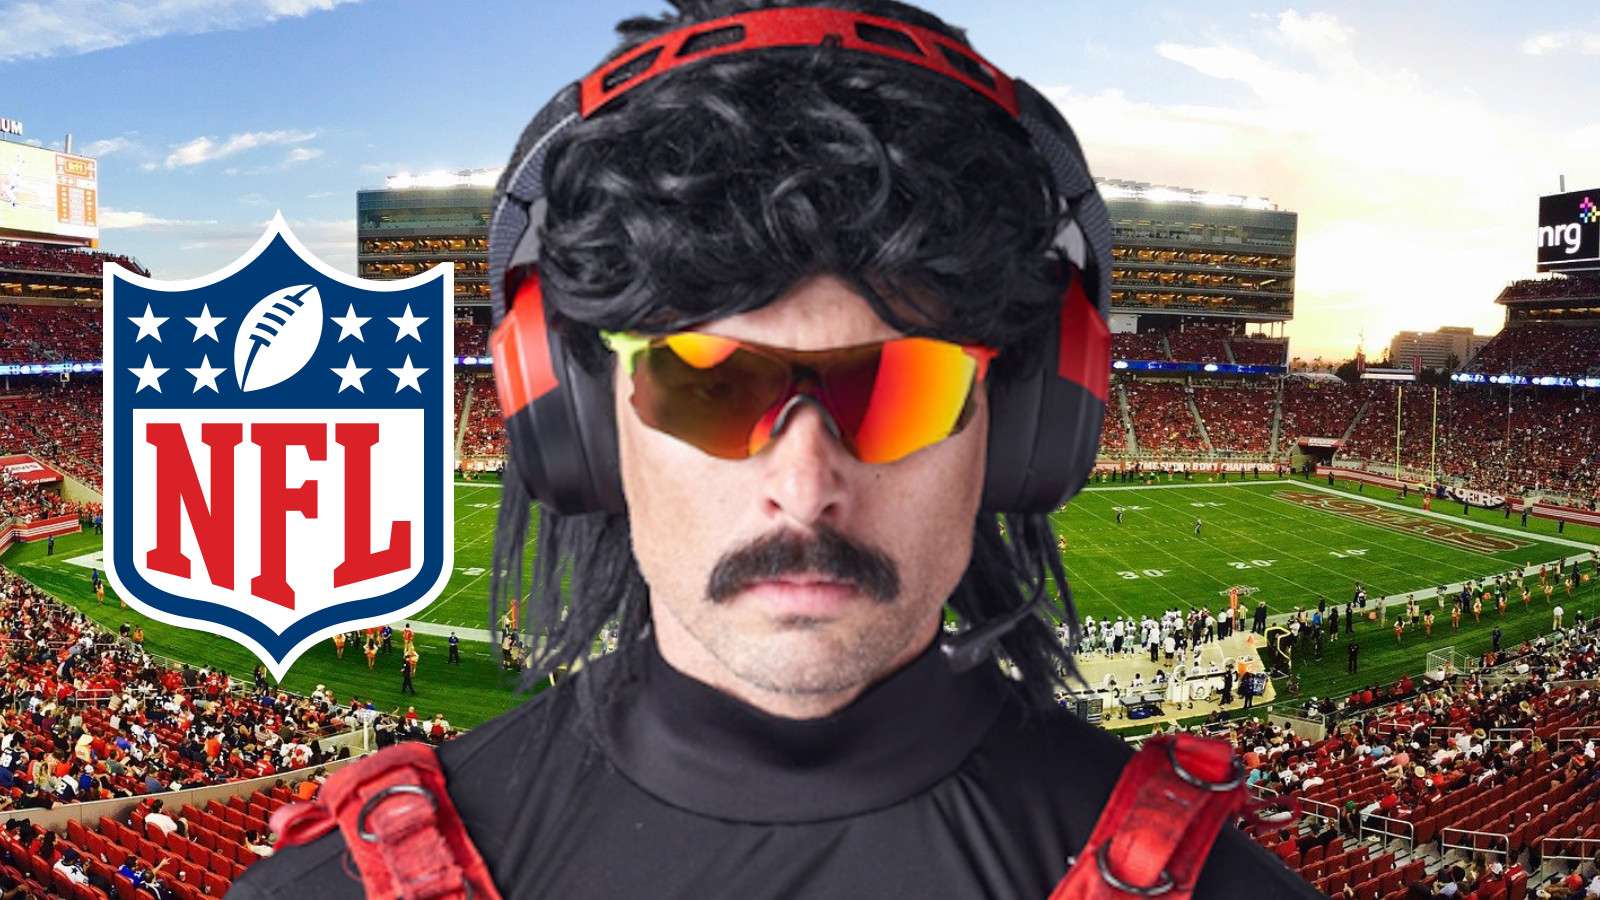 Dr Disrespect announces nfl charity stream